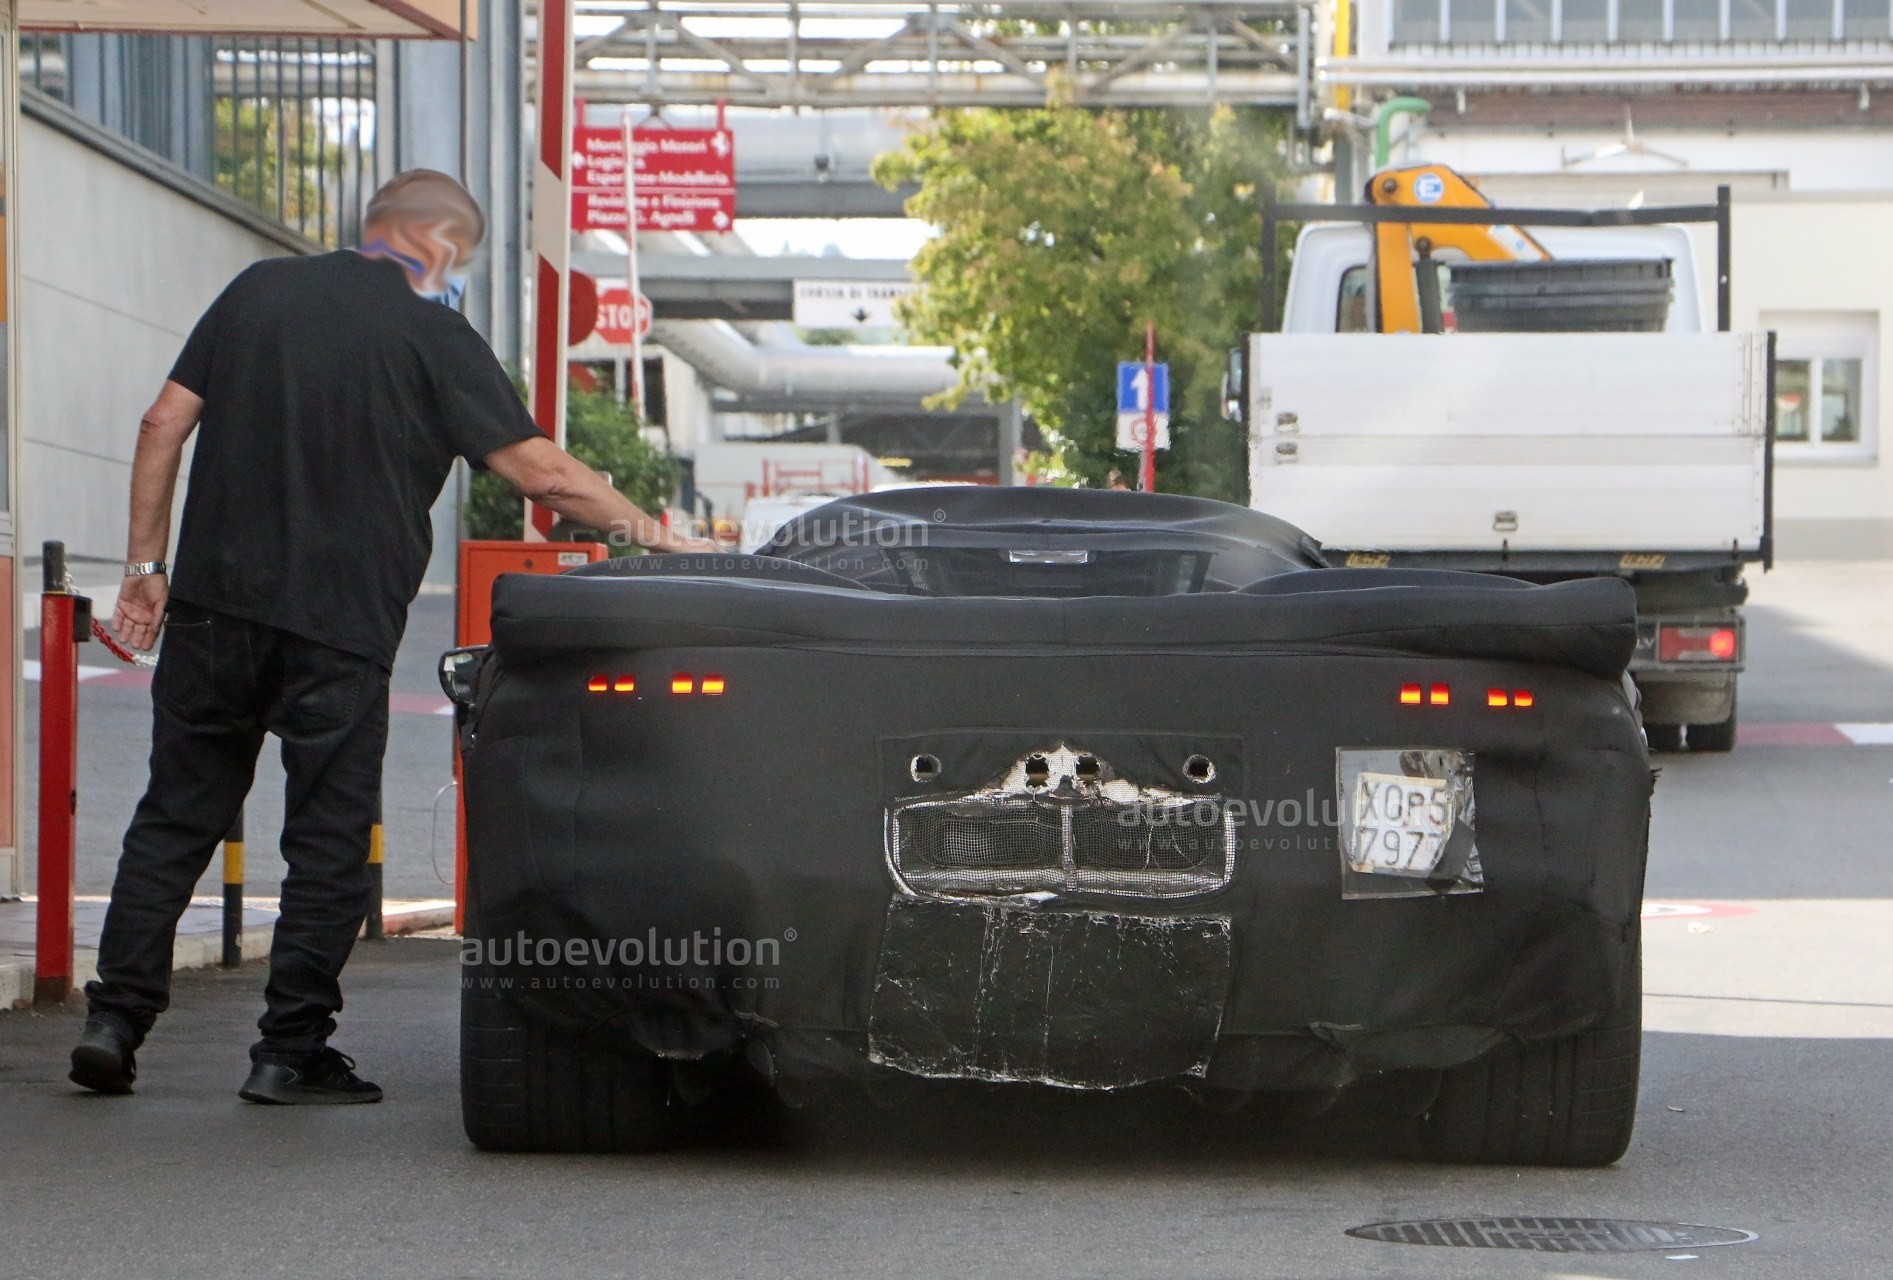 ferrari-icona-spotted-for-with-production-body-could-be-revealed-in-november_6.jpg